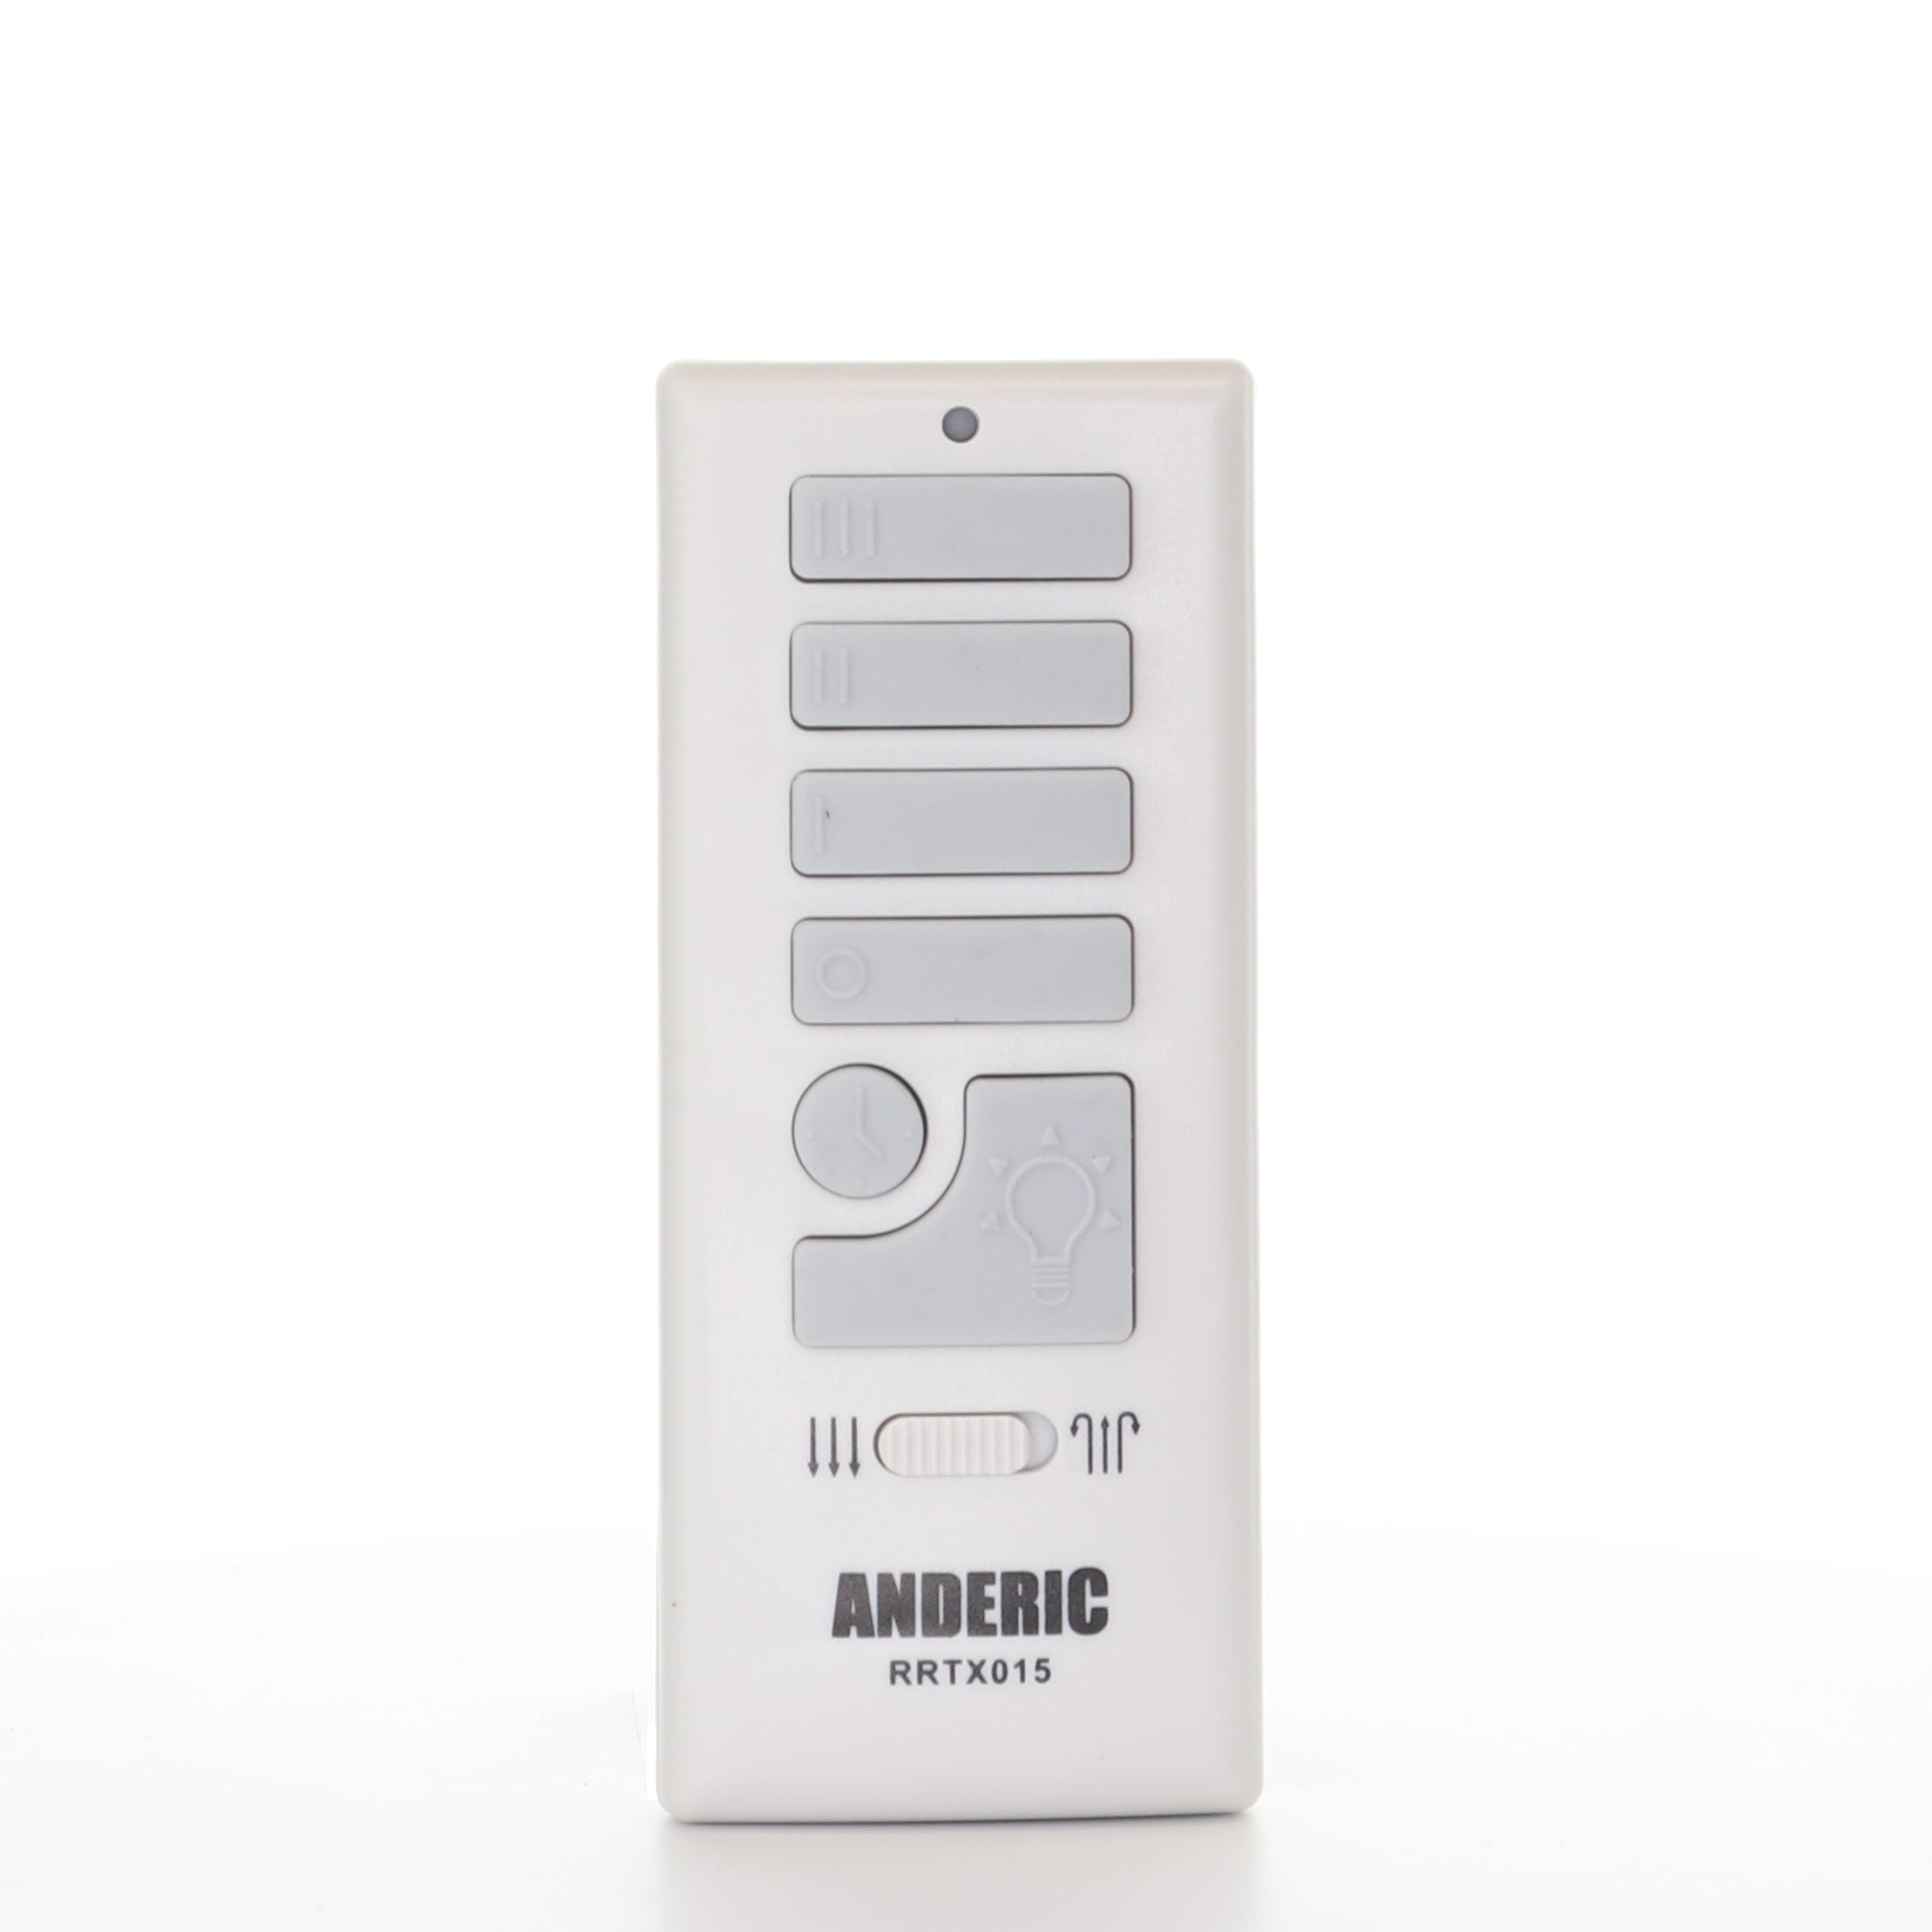 RRTX015 (A25-TX015A) Remote Control for for Harbor Breeze® Ceiling Fans